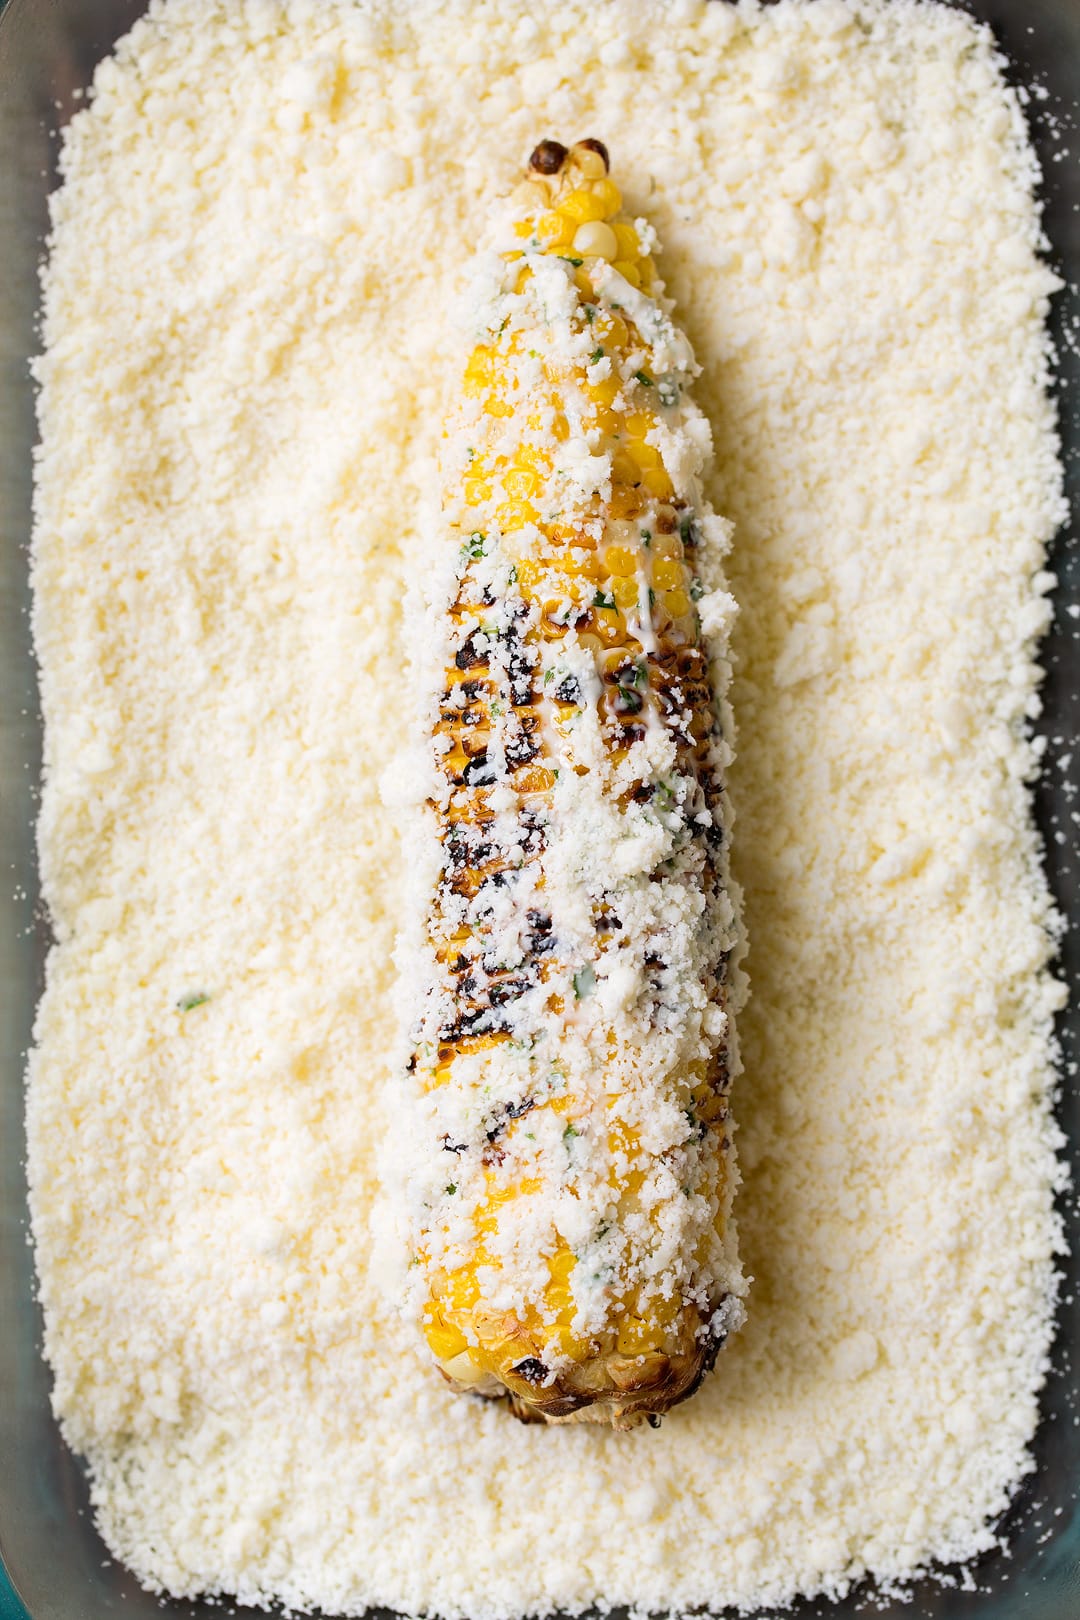 Corn cob being rolled in cotija in a shallow dish to make Mexican street corn.